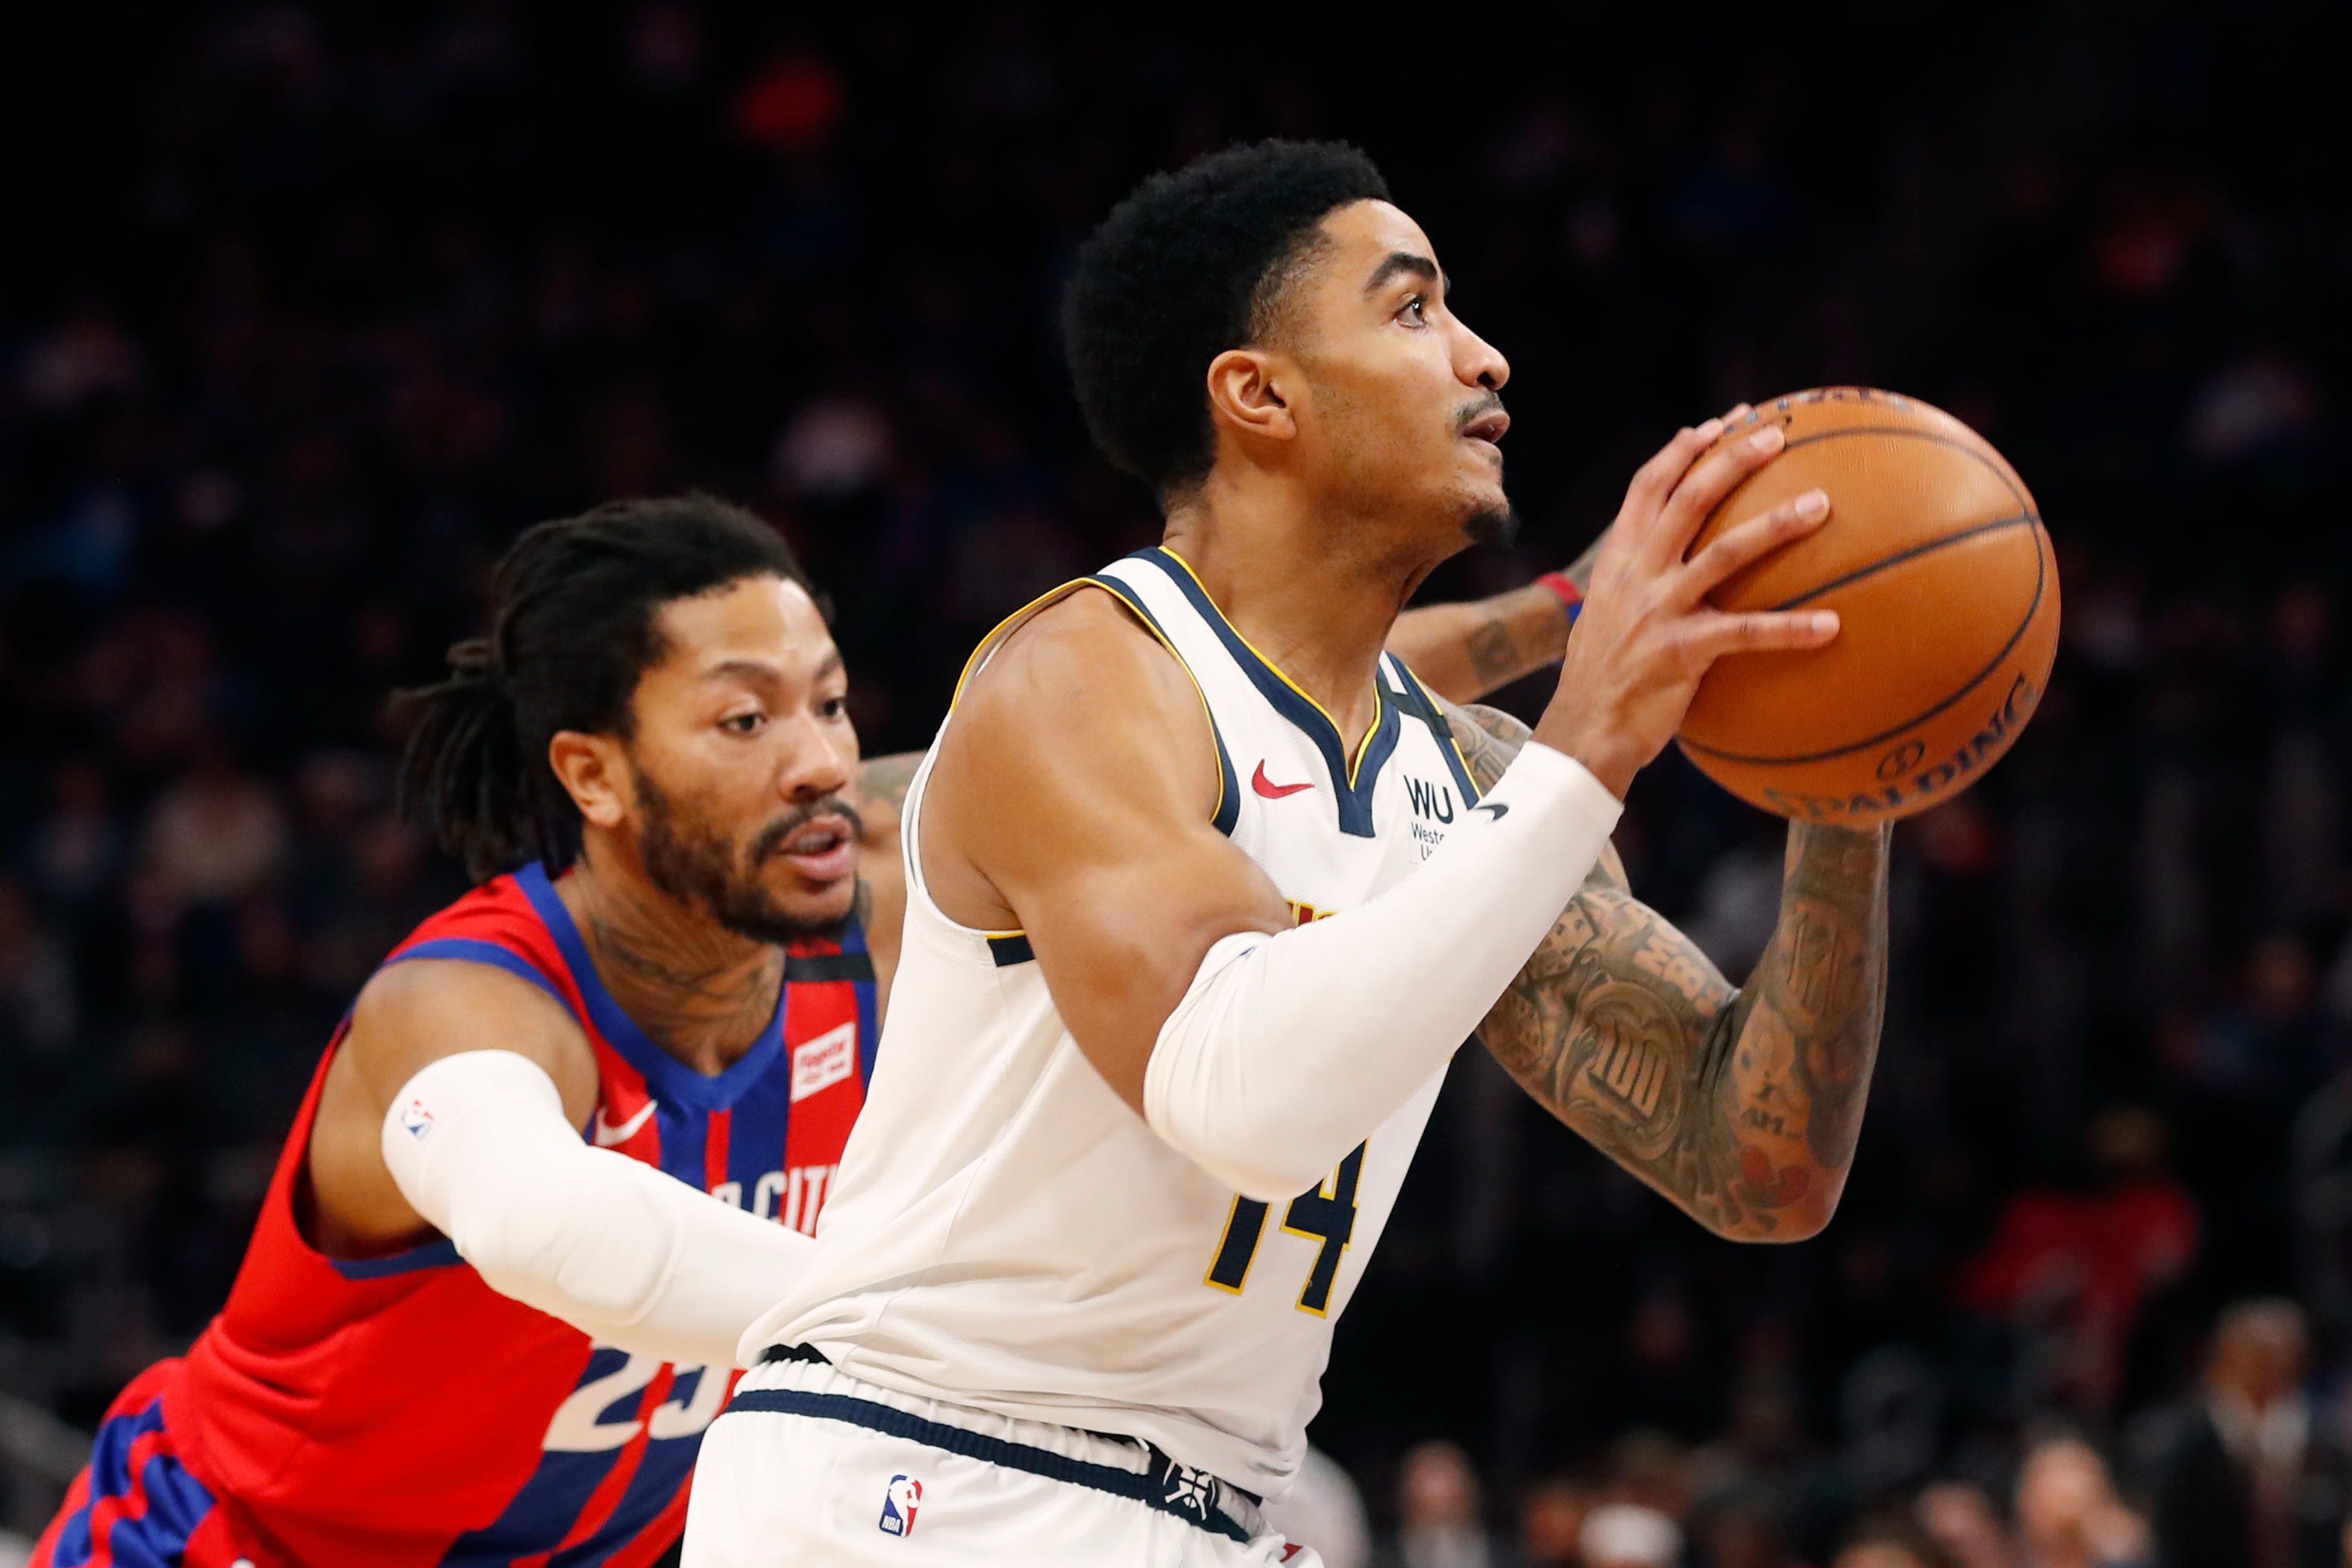 Detroit Pistons guard Derrick Rose (25) reaches in on Denver Nuggets guard Gary Harris (14) during the first half.